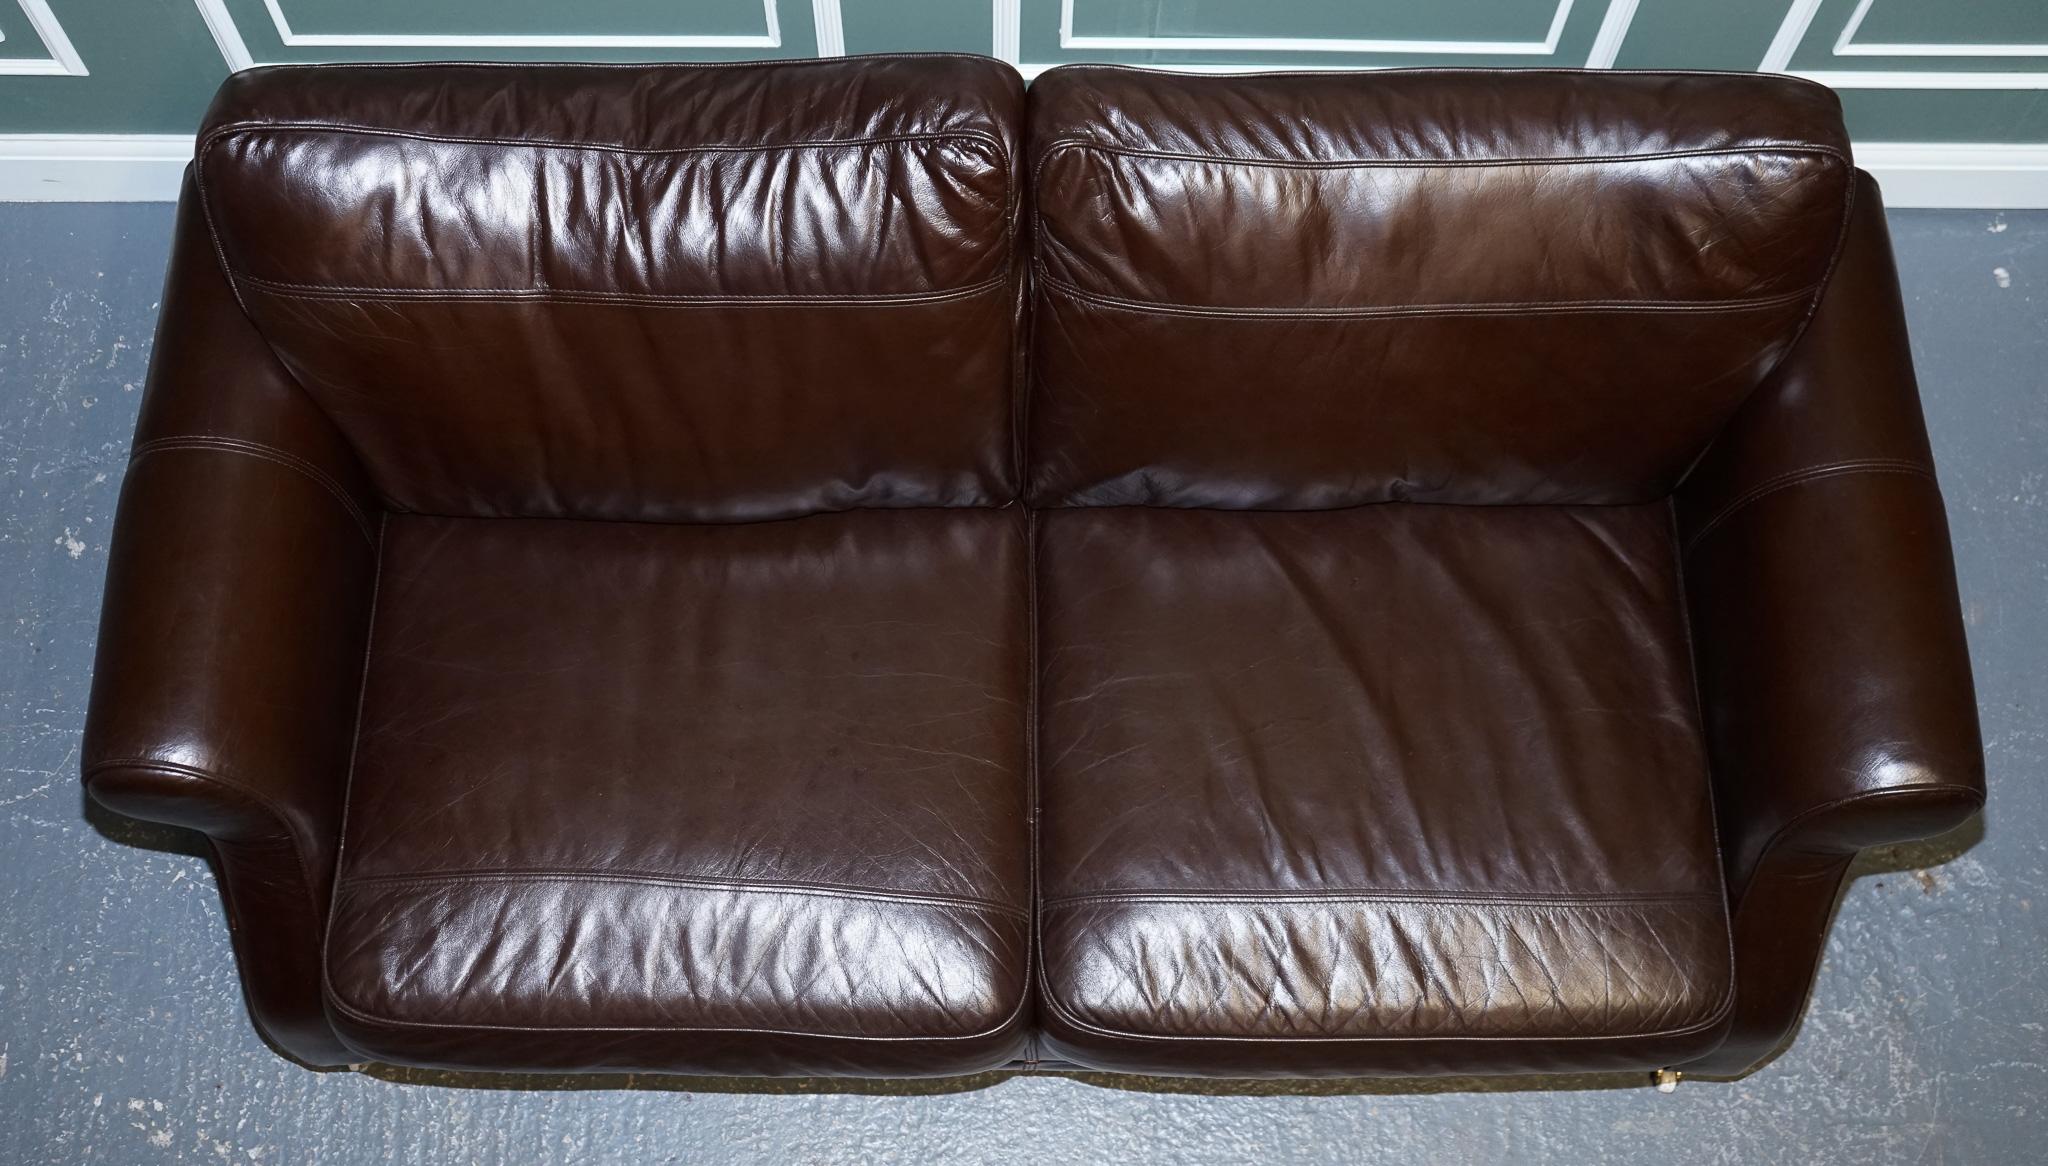 SOFA VINTAGE STUNNiNG CHOCOLATE BROWN LEATHER 2 TO 3 SEATER en vente 1